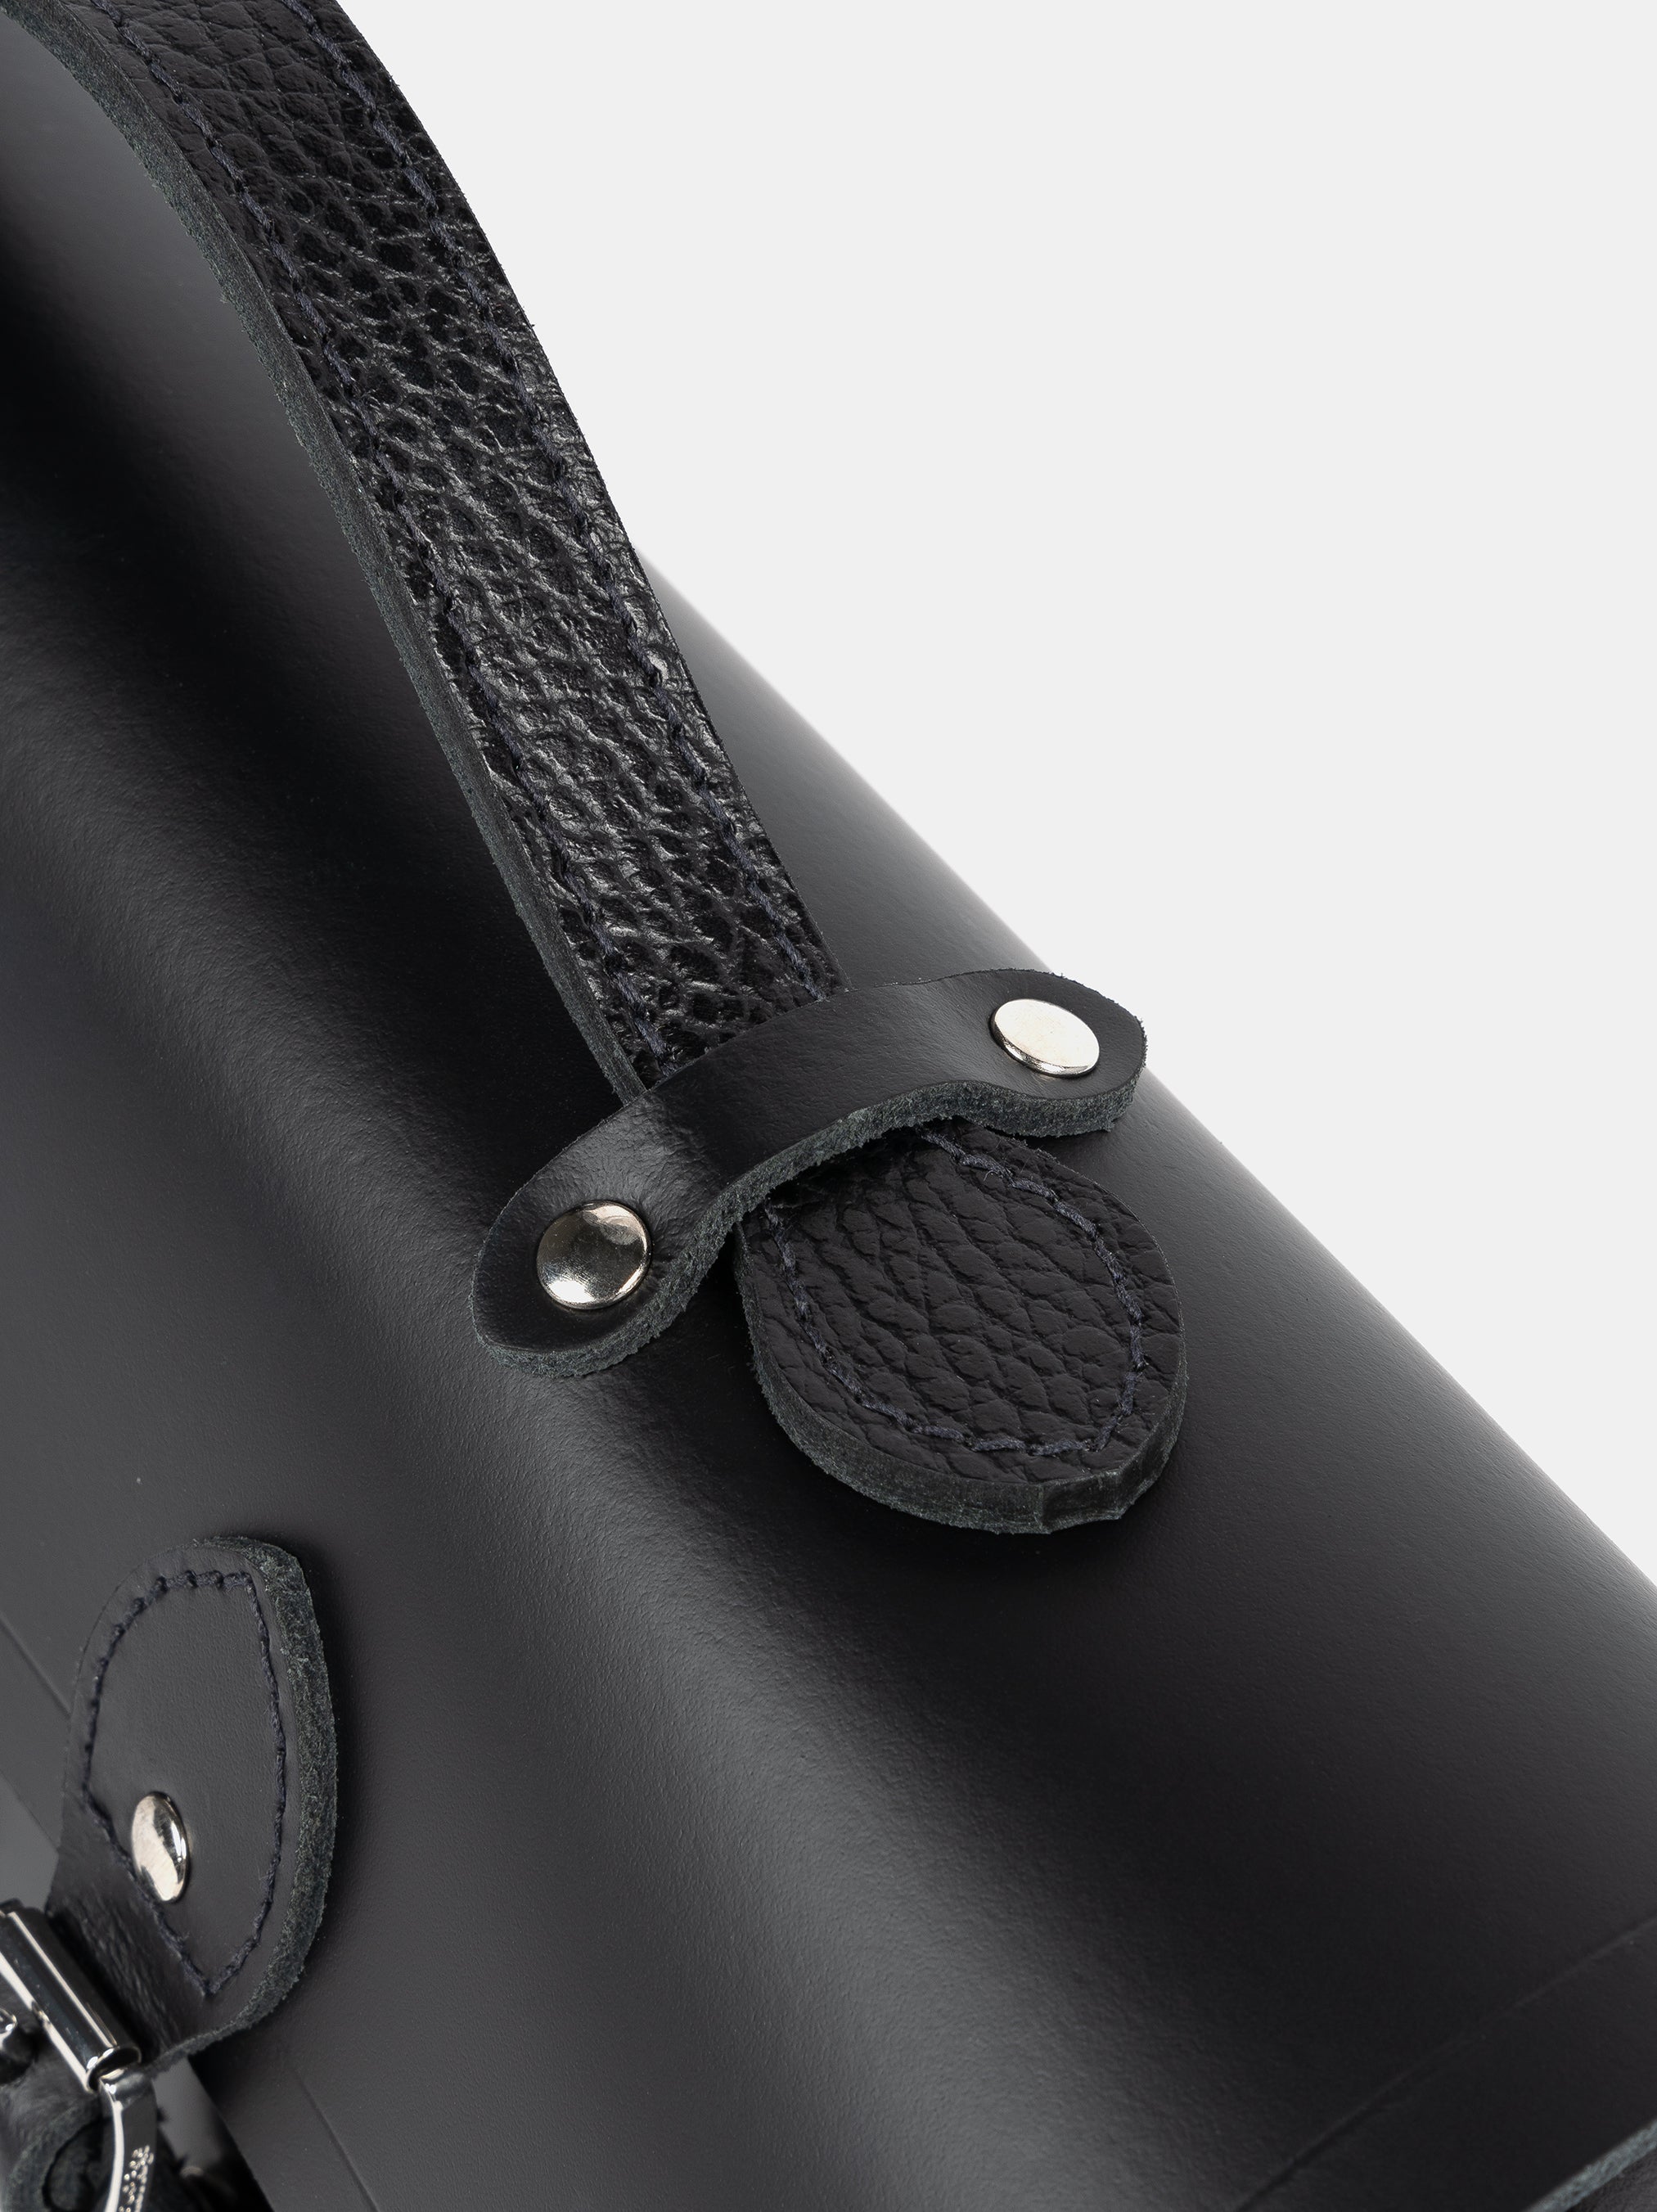 Third detail shot of Long Leather Satchel with Magnetic Closure in Black